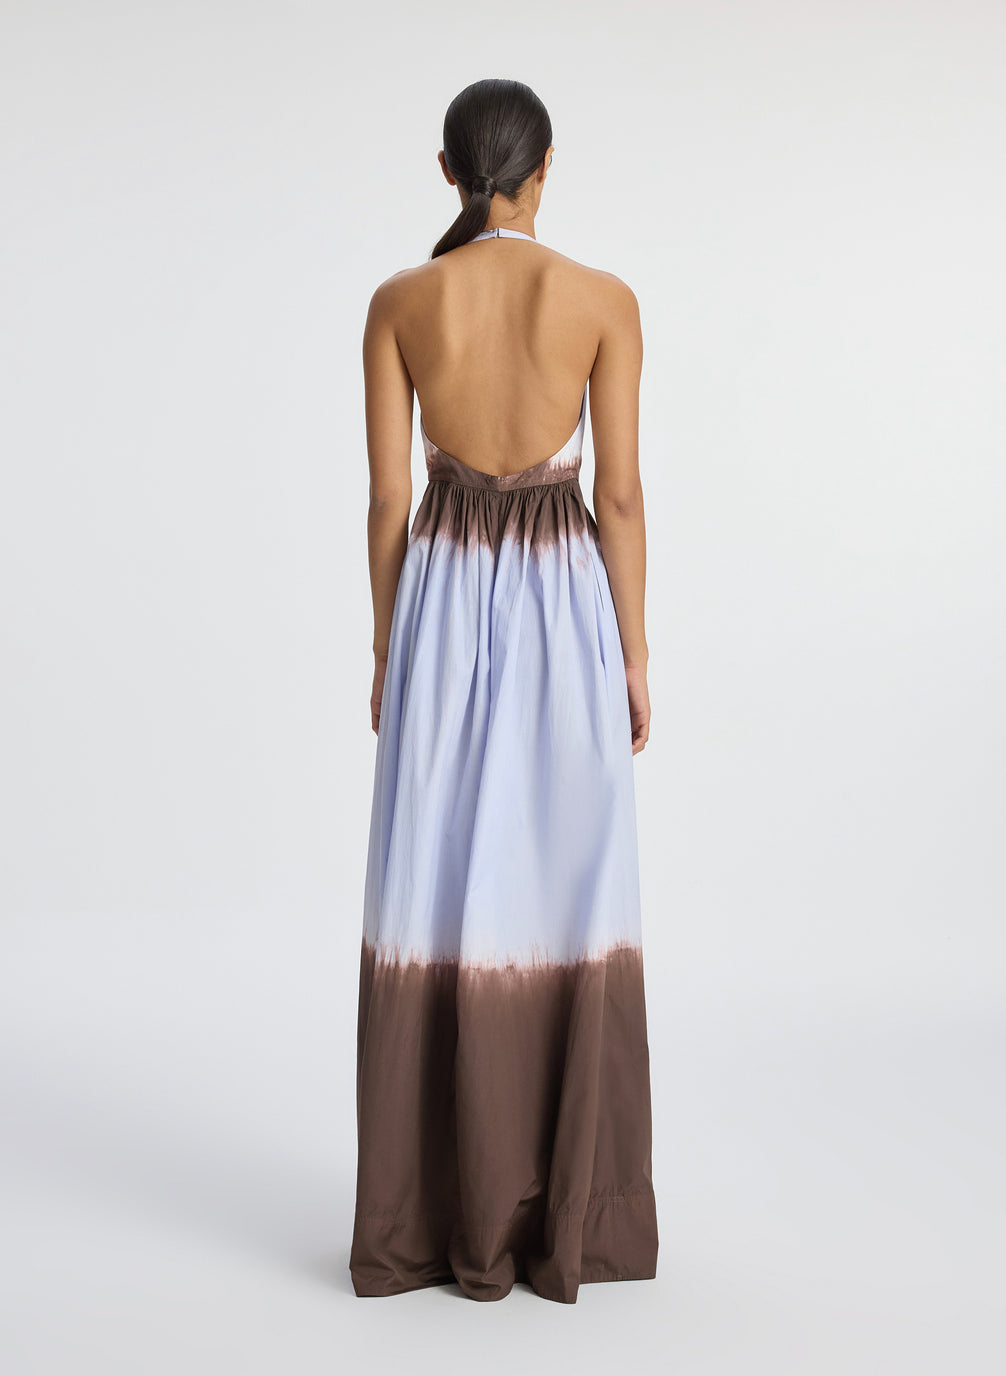 back view of woman wearing dip dye blue and brown sleeveless maxi dress